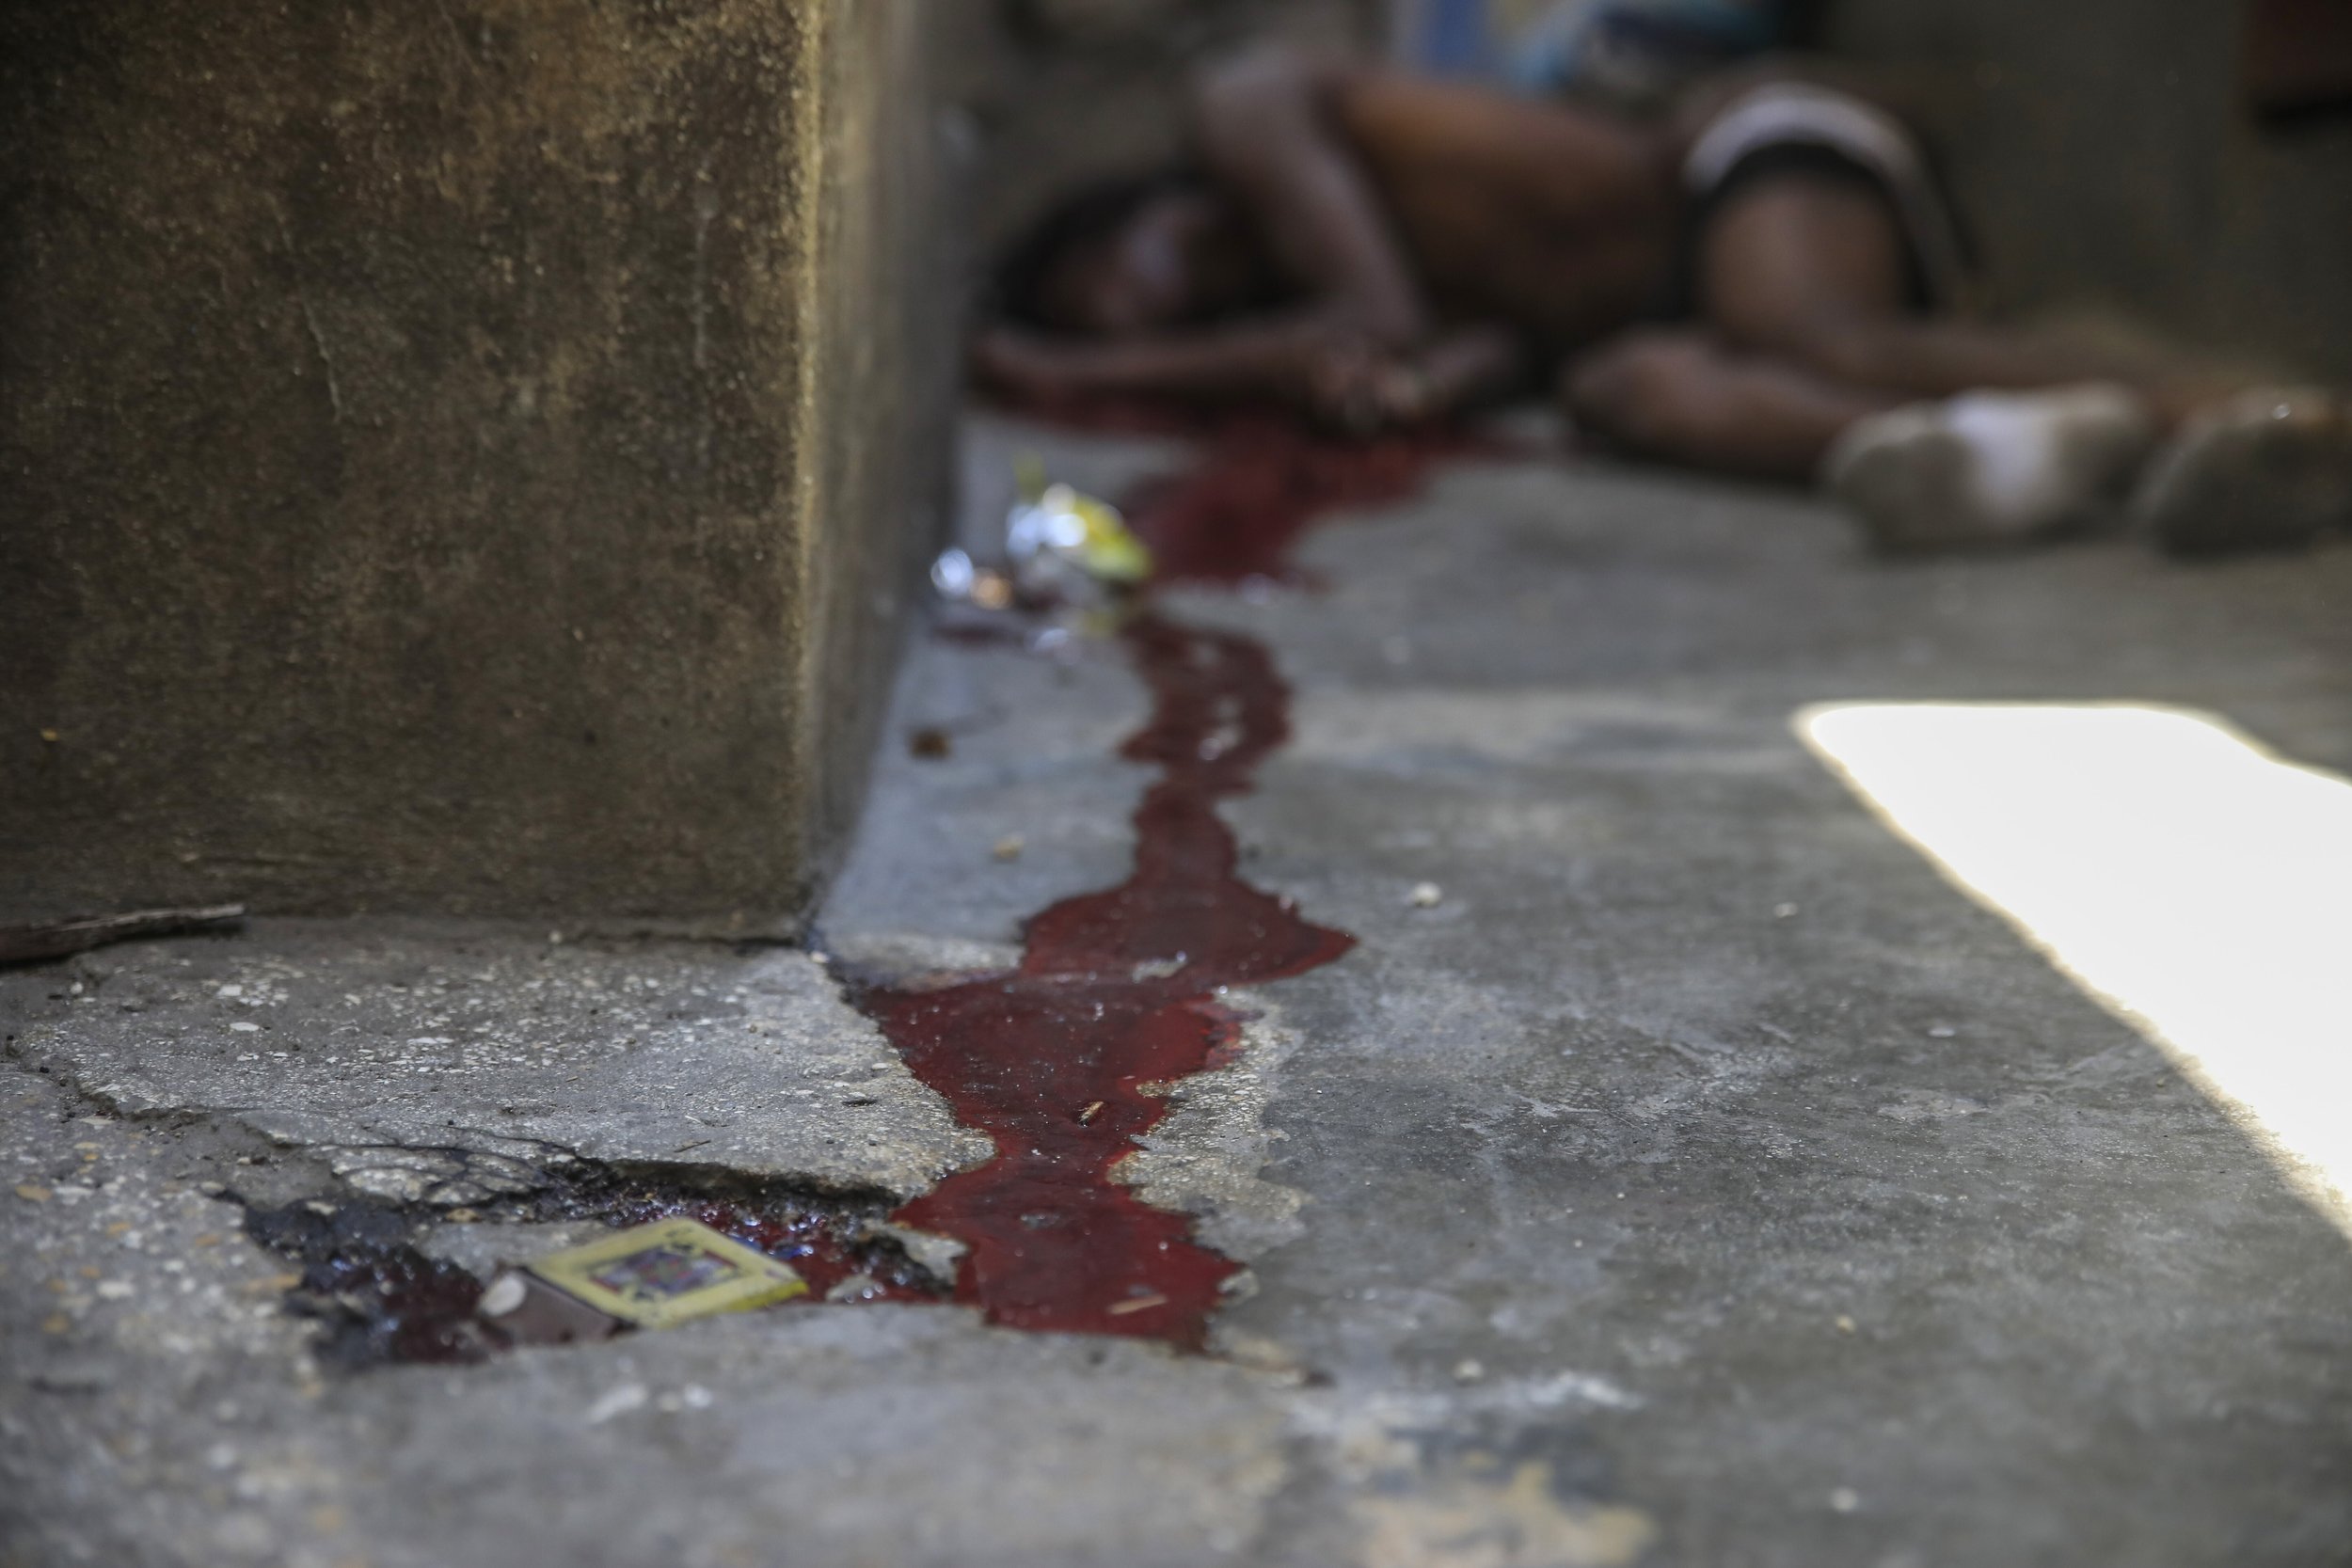  The body of Haitian comedian 'Sexy' lies on the ground after he was shot dead by unknown assailants in Port-au-Prince, Haiti, on March 3, 2023. (AP Photo/Odelyn Joseph) 